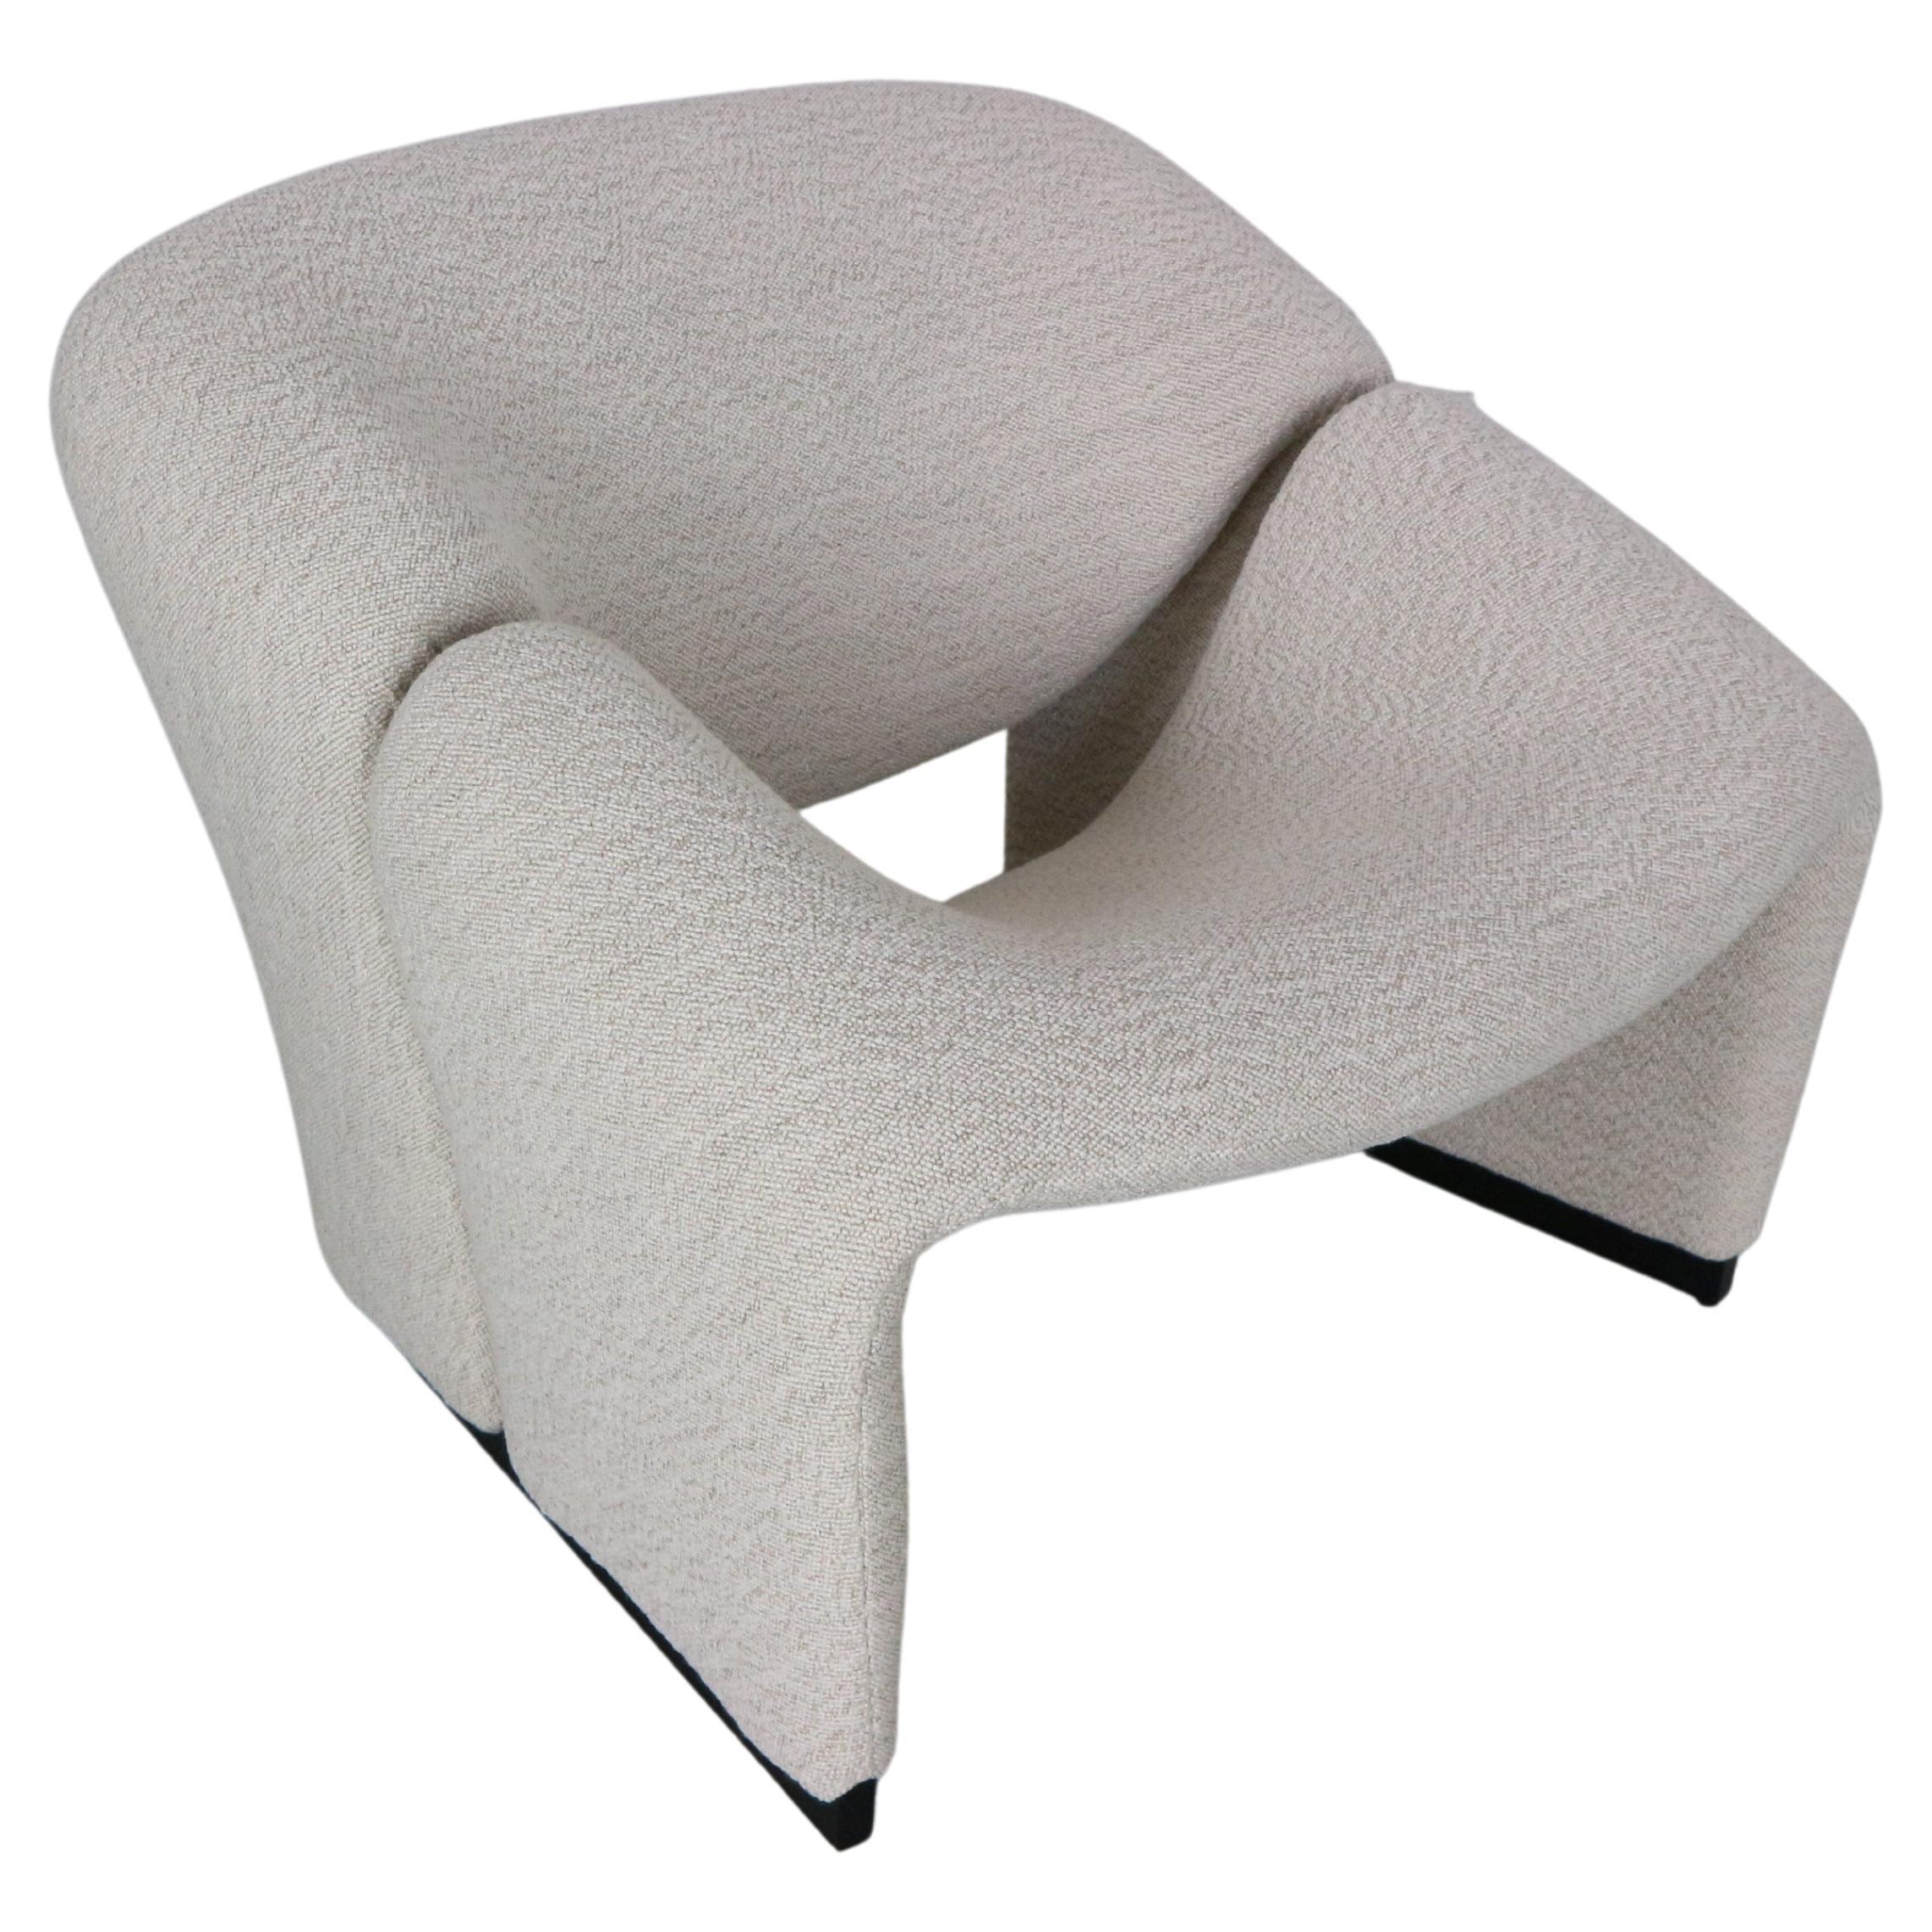 Pierre Paulin 1st Edition F580 Groovy Armchair for Artifort, New Upholstery